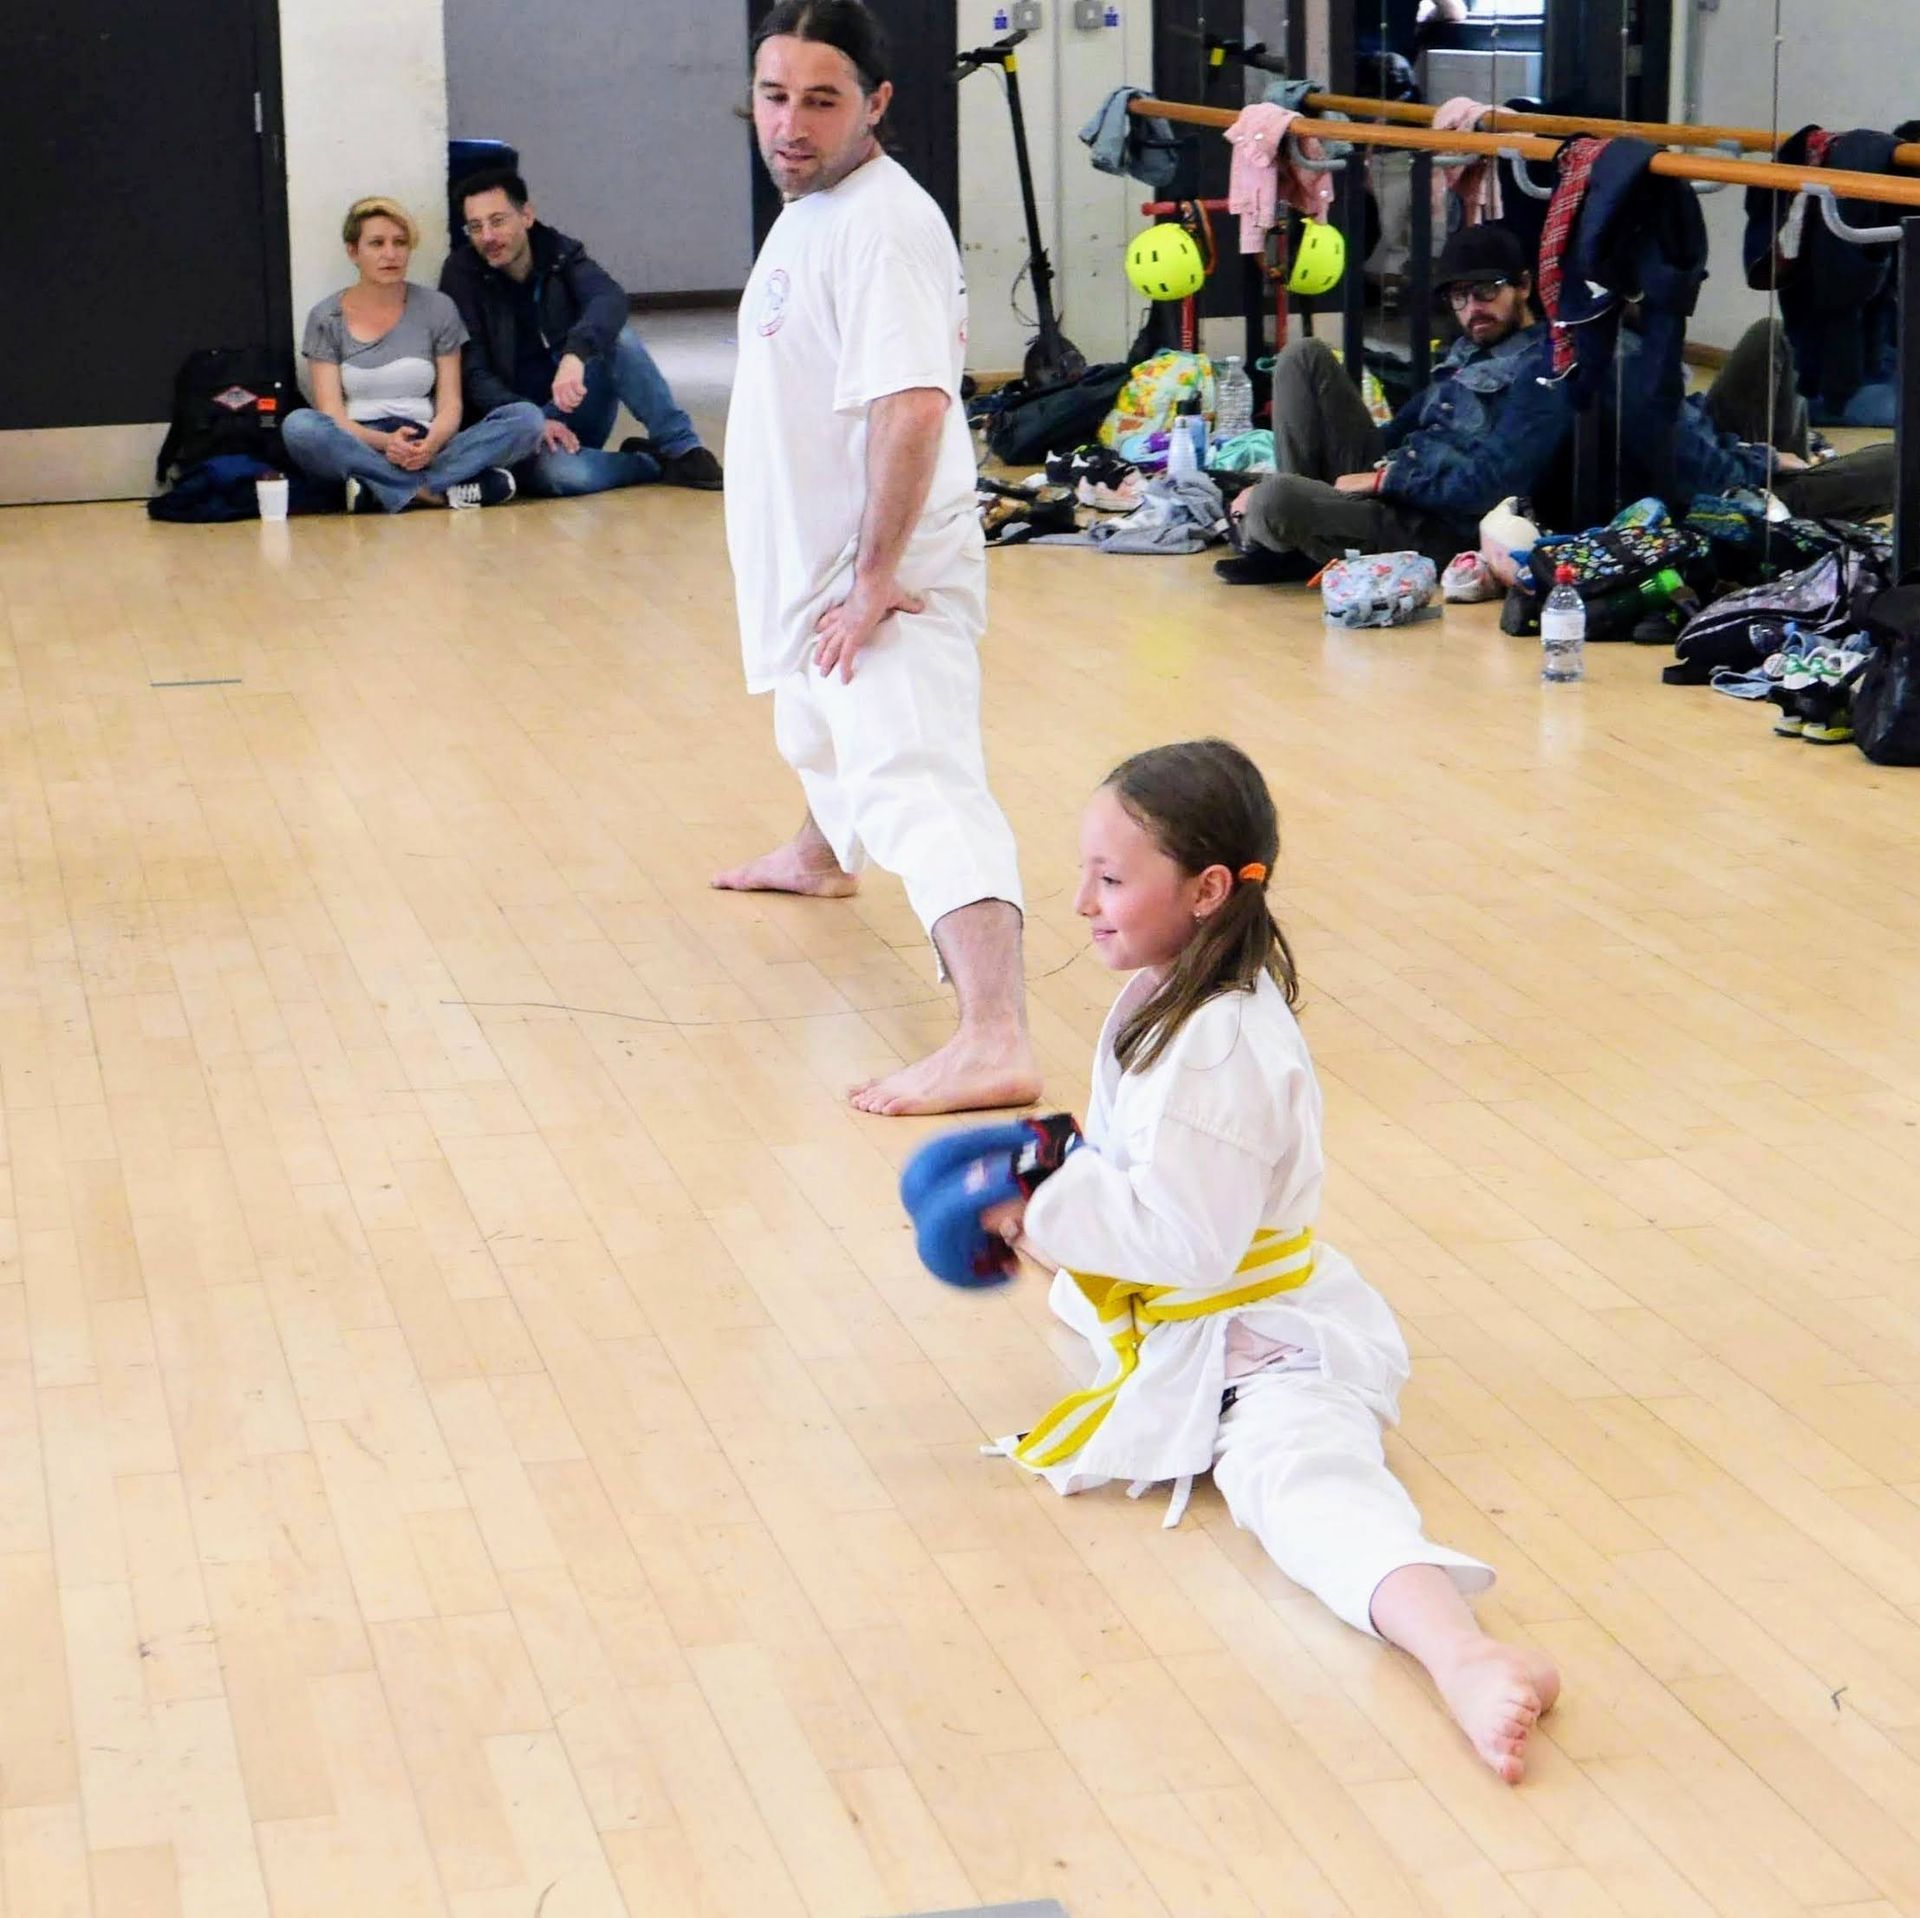 Karate classes and Self-Defence at Porchester Centre. In W2, London.